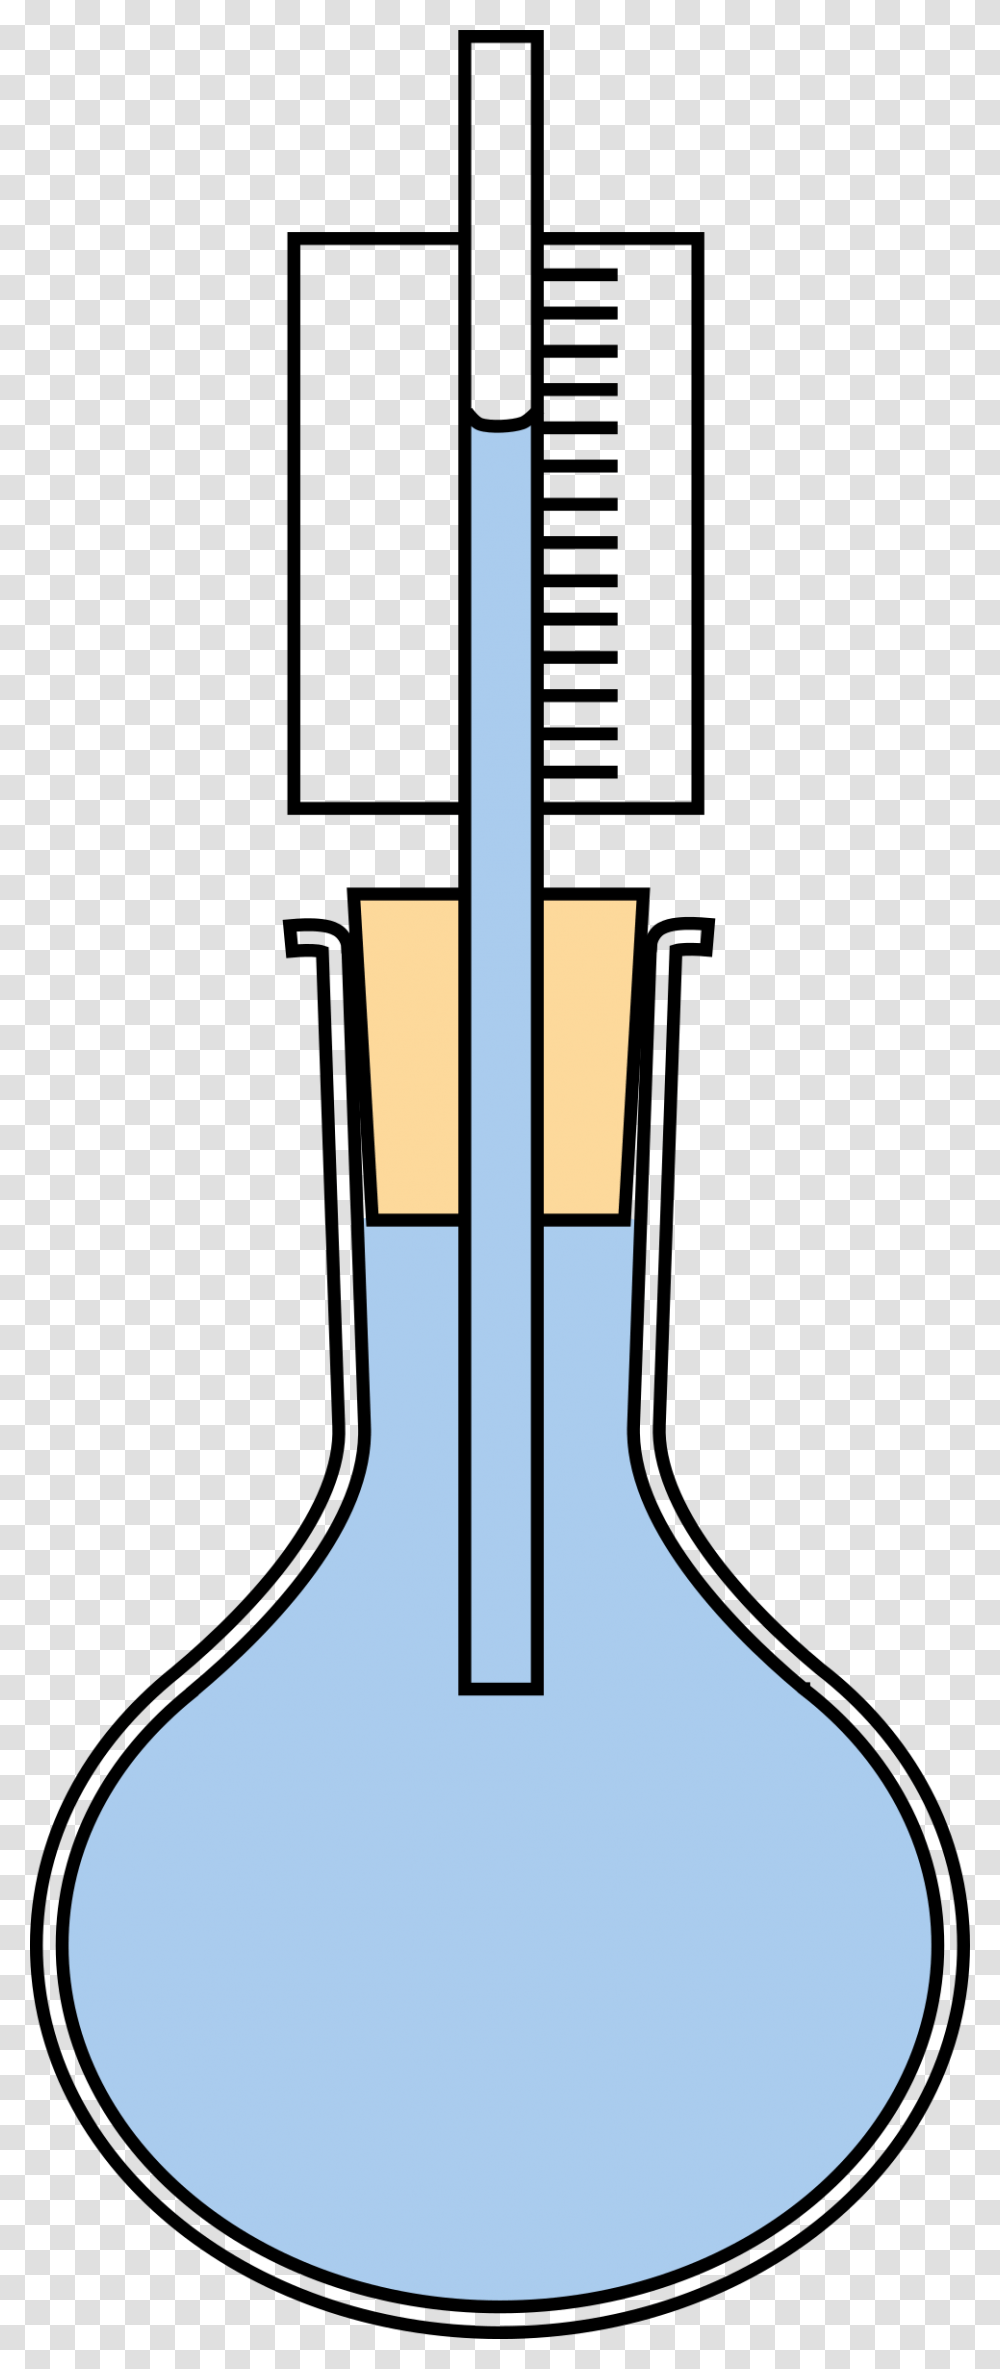 Water Expansion In Flask Colour Clip Arts Conical Flask With Thermometer, Shovel, Tool, Oars, Weapon Transparent Png